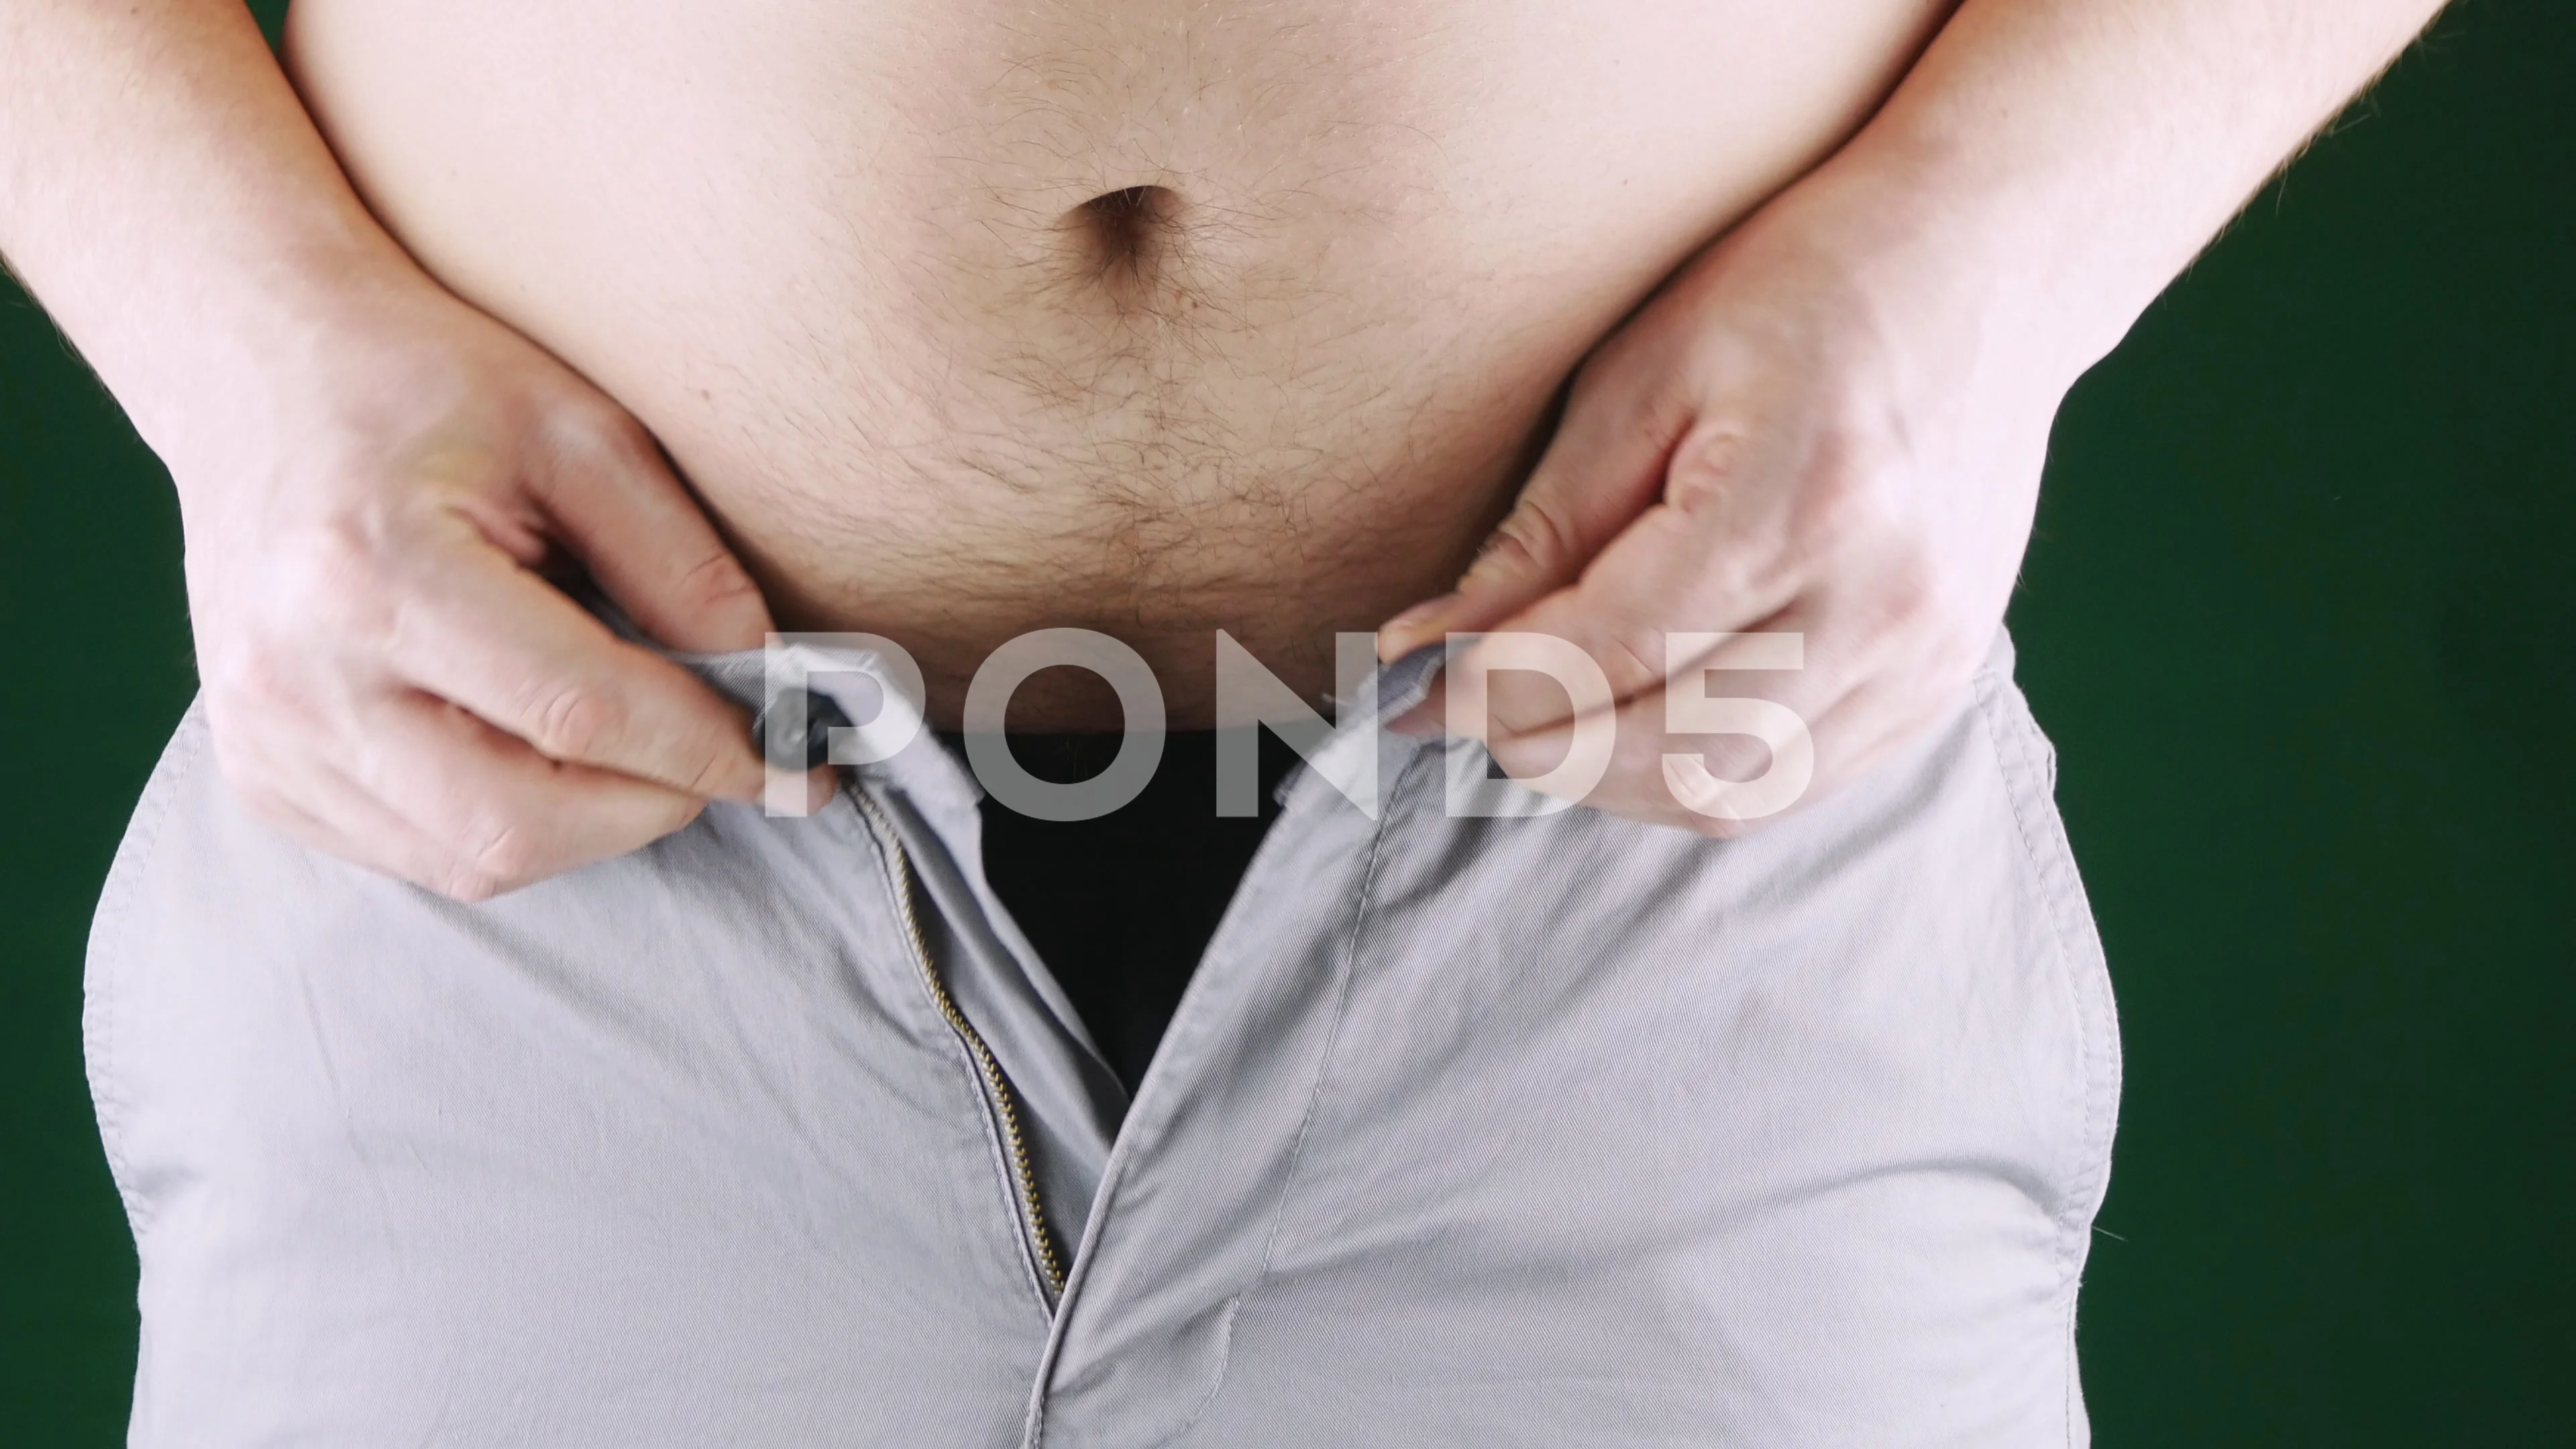 Fat man can't button your pants due to p, Stock Video